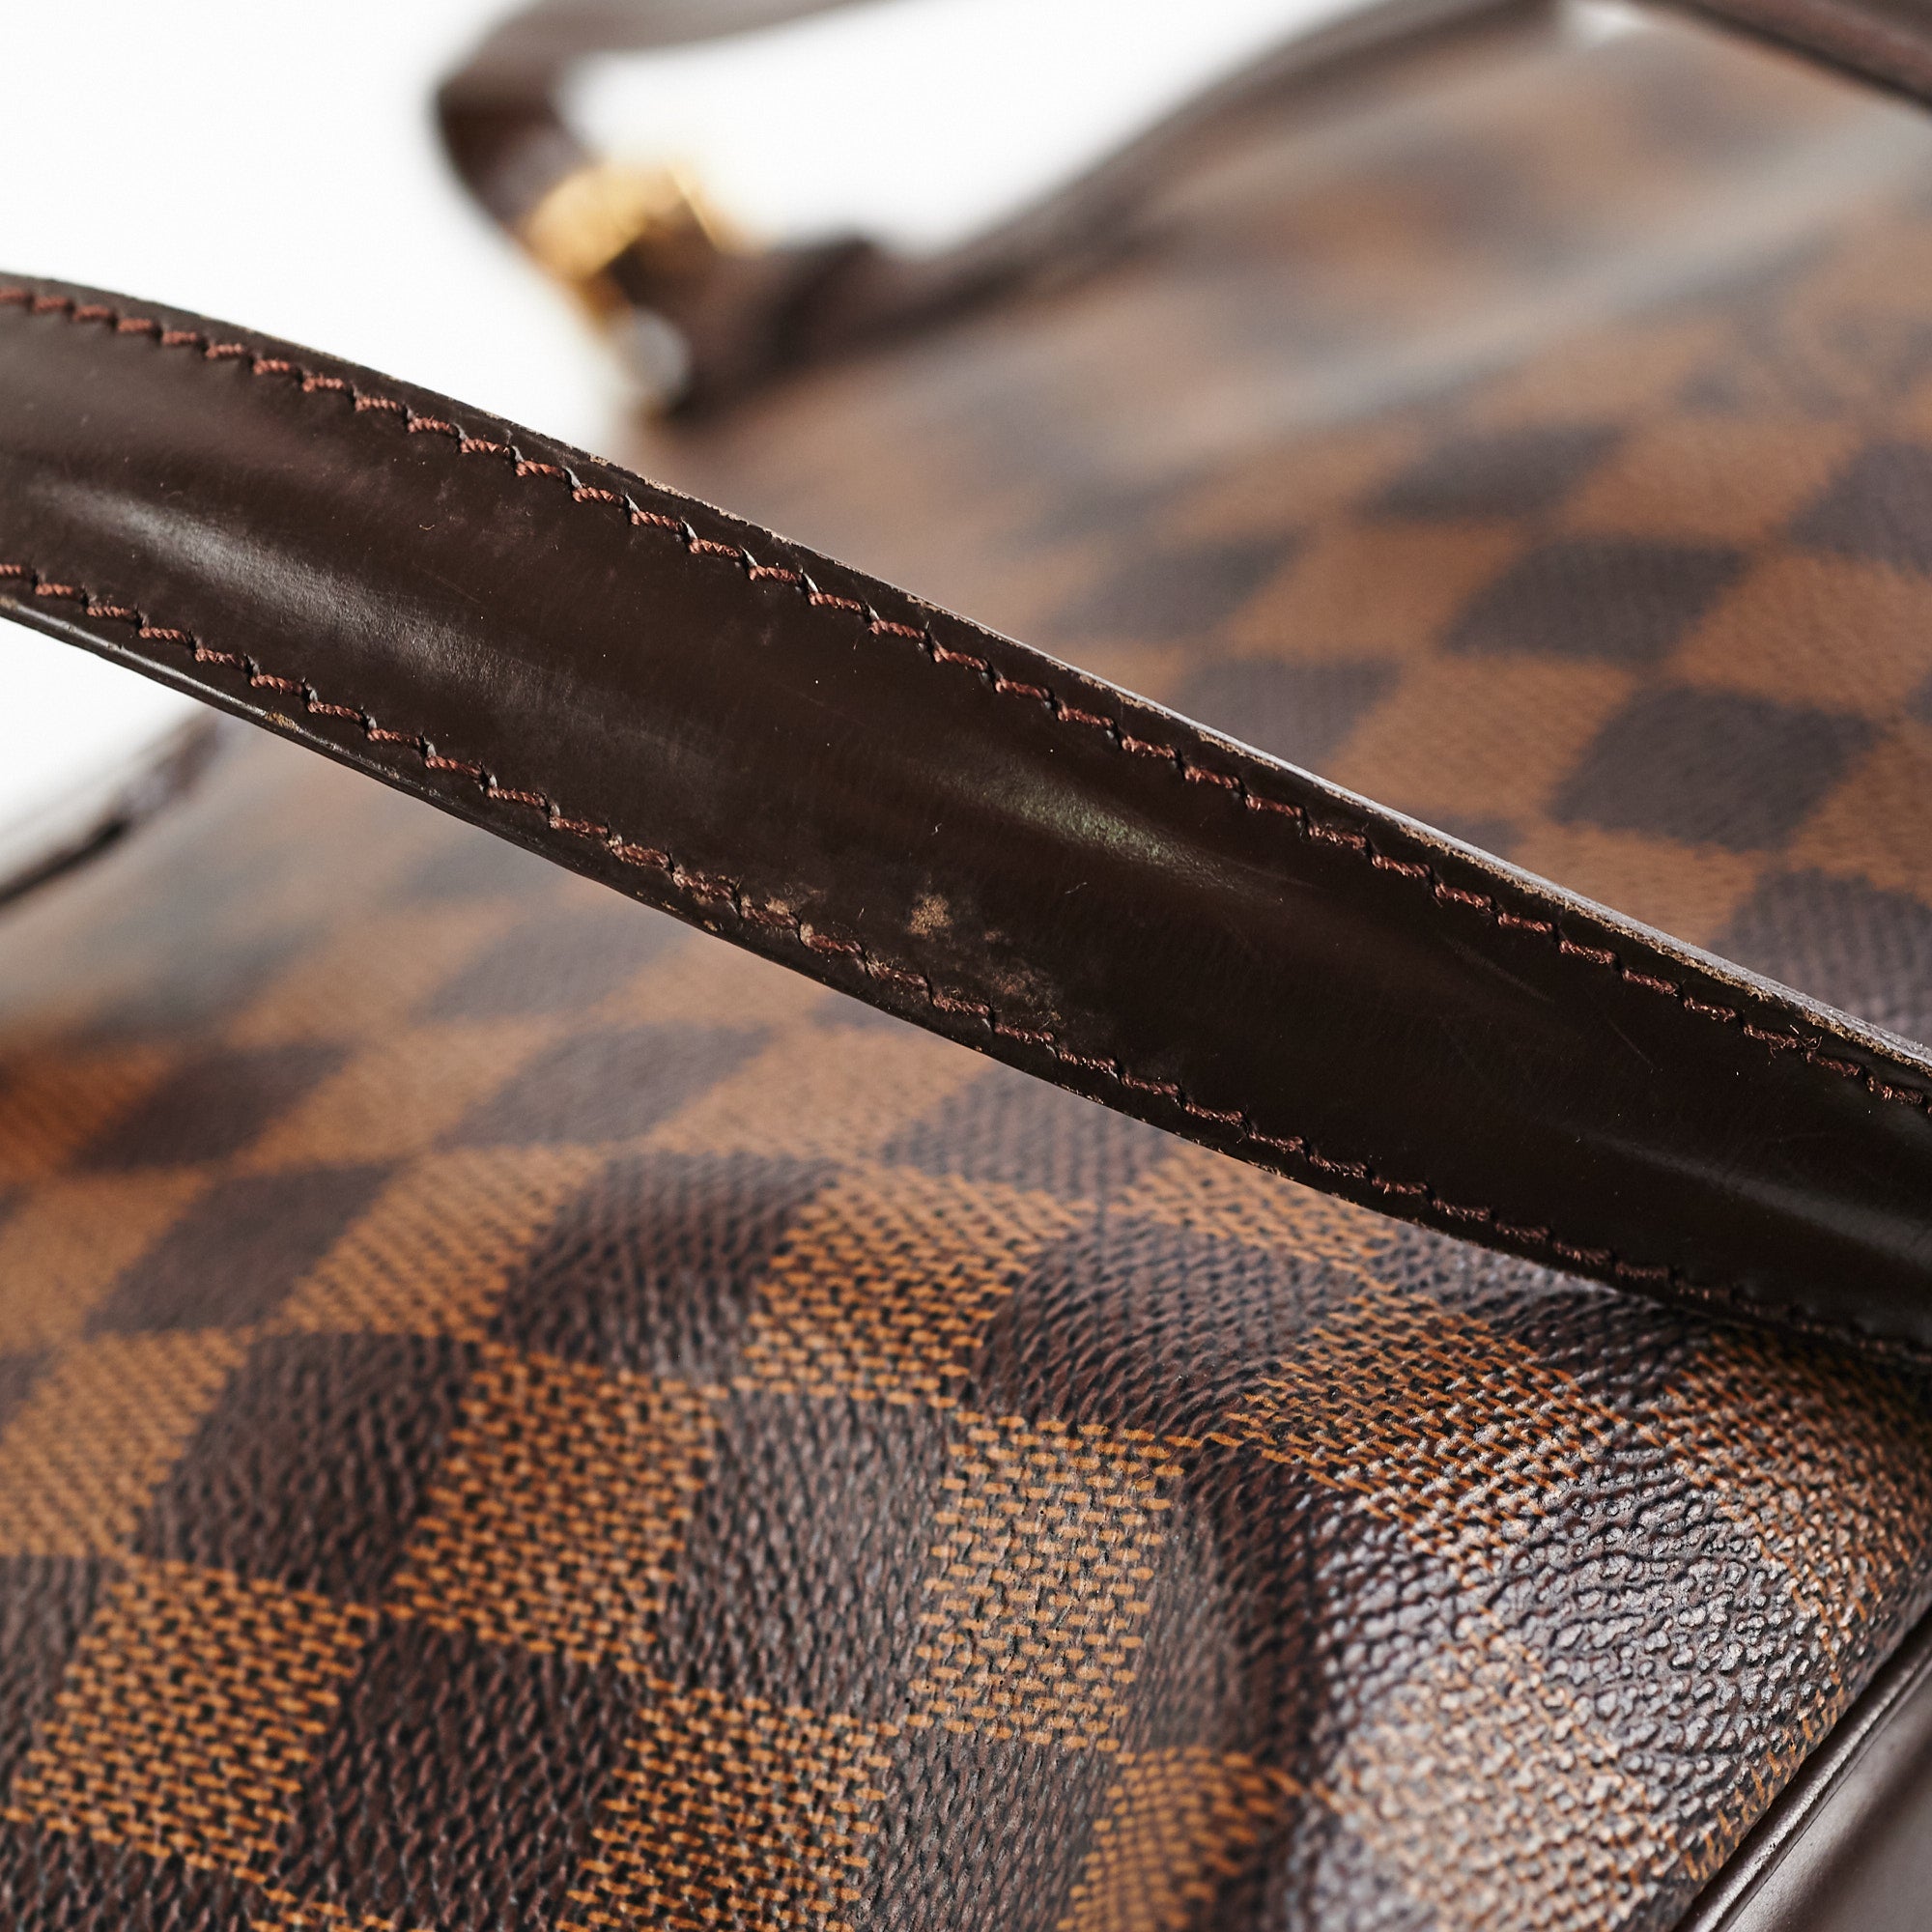 Louis Vuitton Chelsea damier tote – Lady Clara's Collection